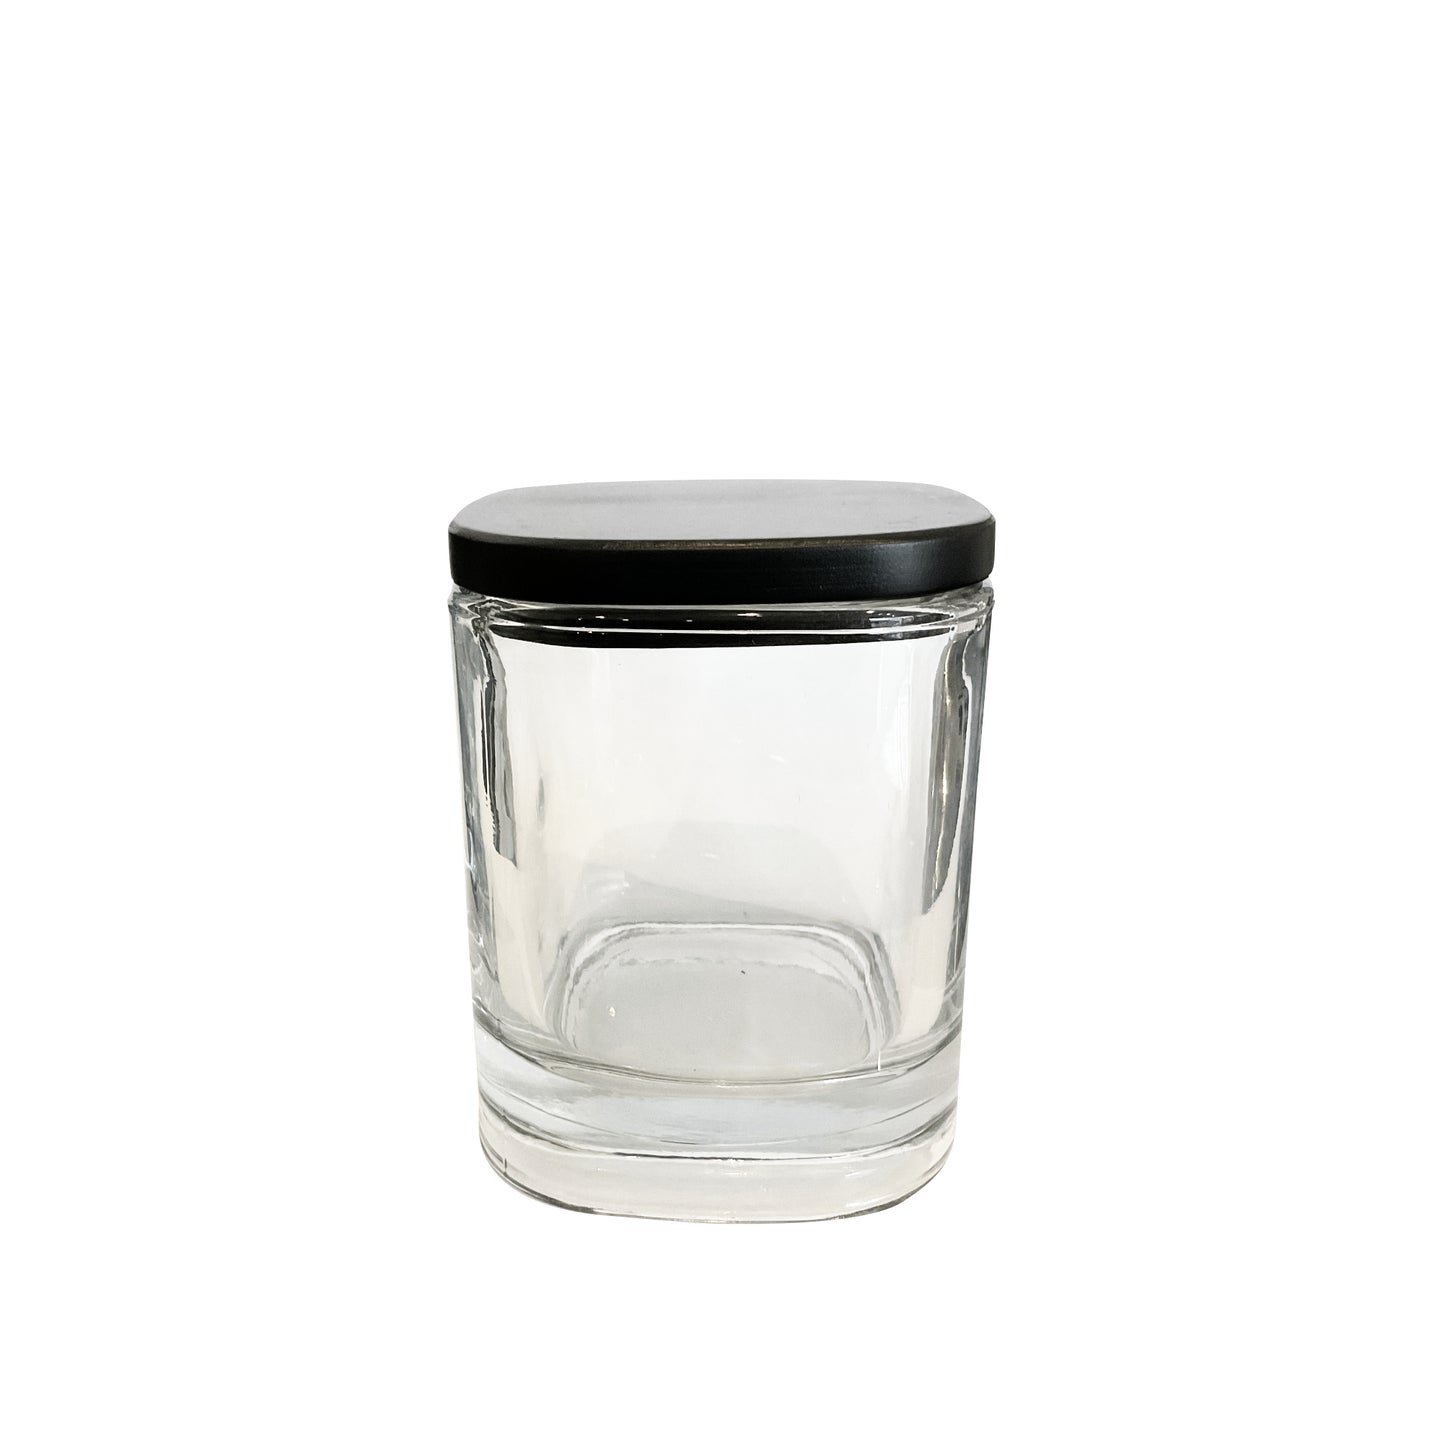 8 oz (240 ml) Clear Glass Square Candle Jar with Black Wooden Top